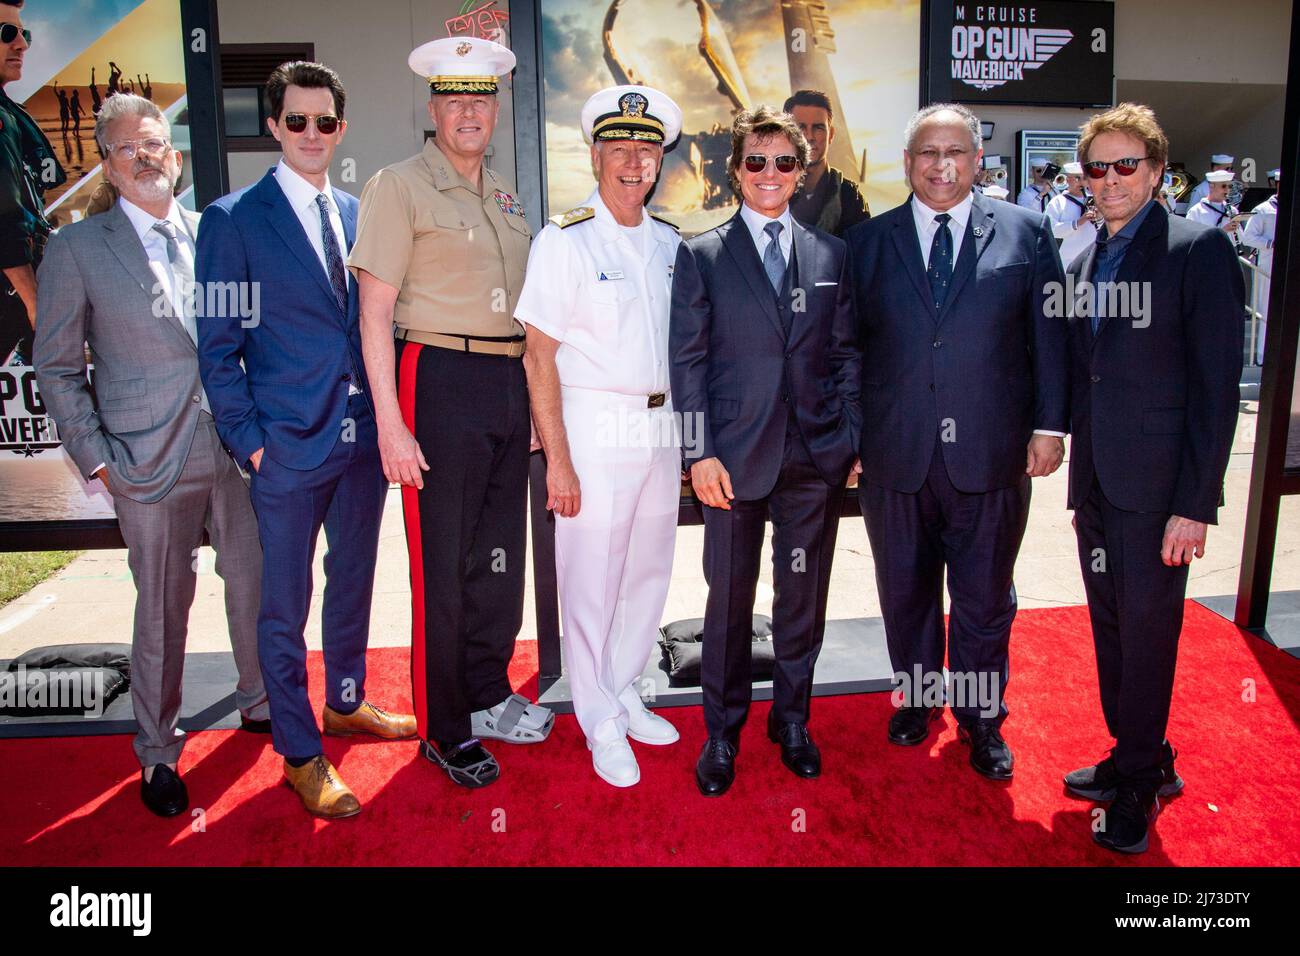 San Diego, United States. 04 May, 2022. American actor Tom Cruise, center, poses on the red carpet during the advance movie premiere of Top Gun: Maverick, at Naval Air Station North Island, May 4, 2022 in San Diego, California. From left, Chris McQuarrie, Joe Kosinski, Lt. Gen. Mark Wise, Vice Adm. Kenneth Whitesell, Tom Cruise, Secretary of the Navy Carlos Del Toro, and Jerry Bruckheimer.  Credit: MC2 Olympia McCoy/US Navy/Alamy Live News Stock Photo